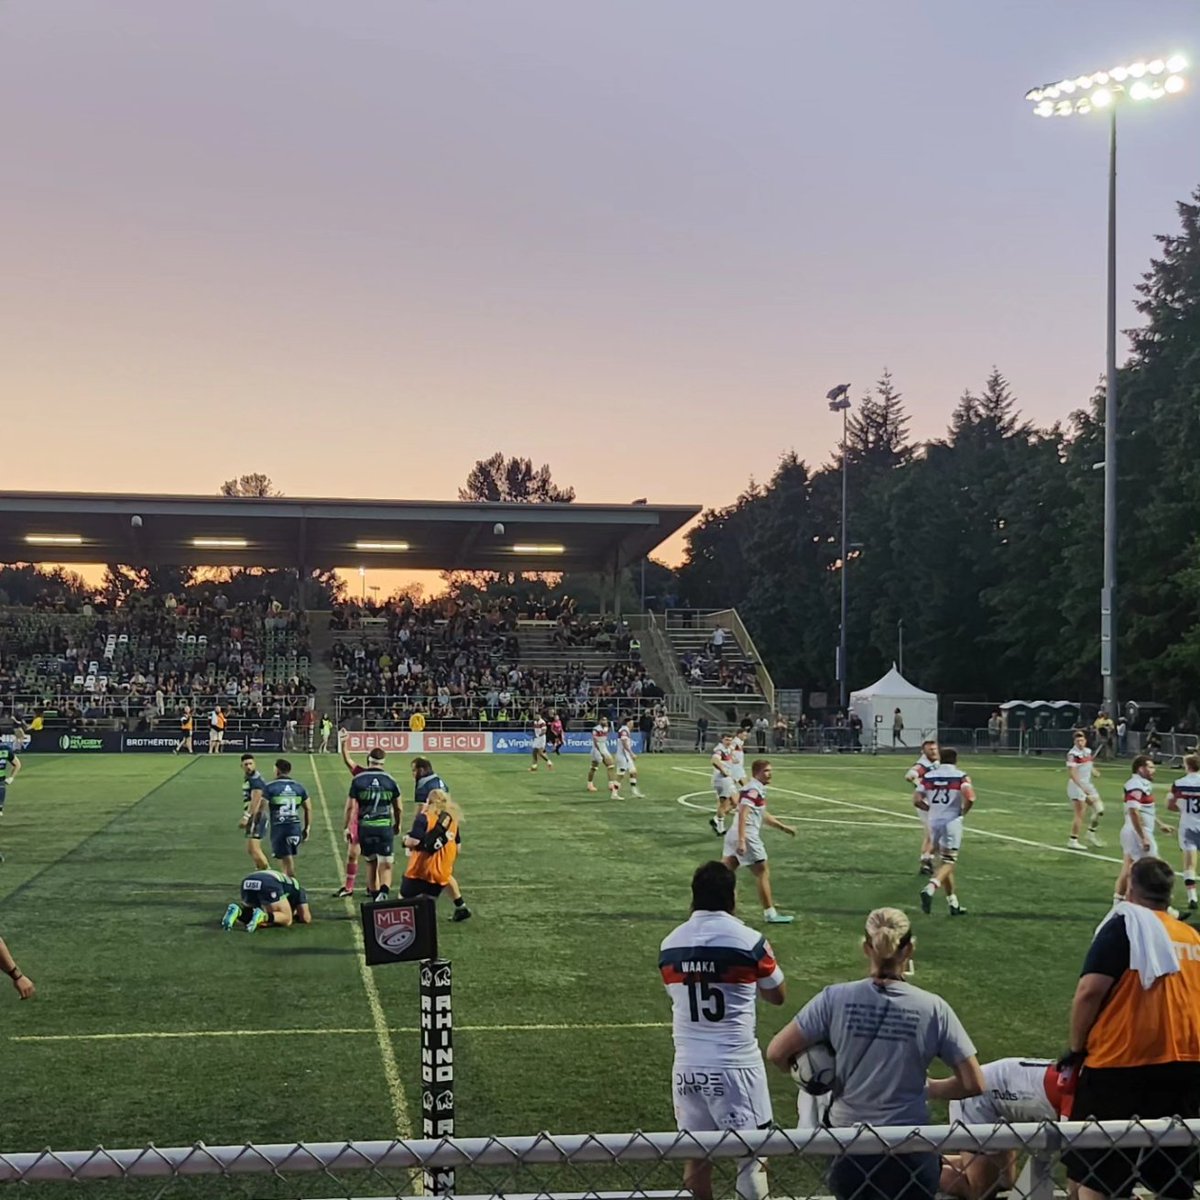 Caught a Seawolves v Freejacks game yesterday and damn it was fun. 
Rugby thighs over all else.